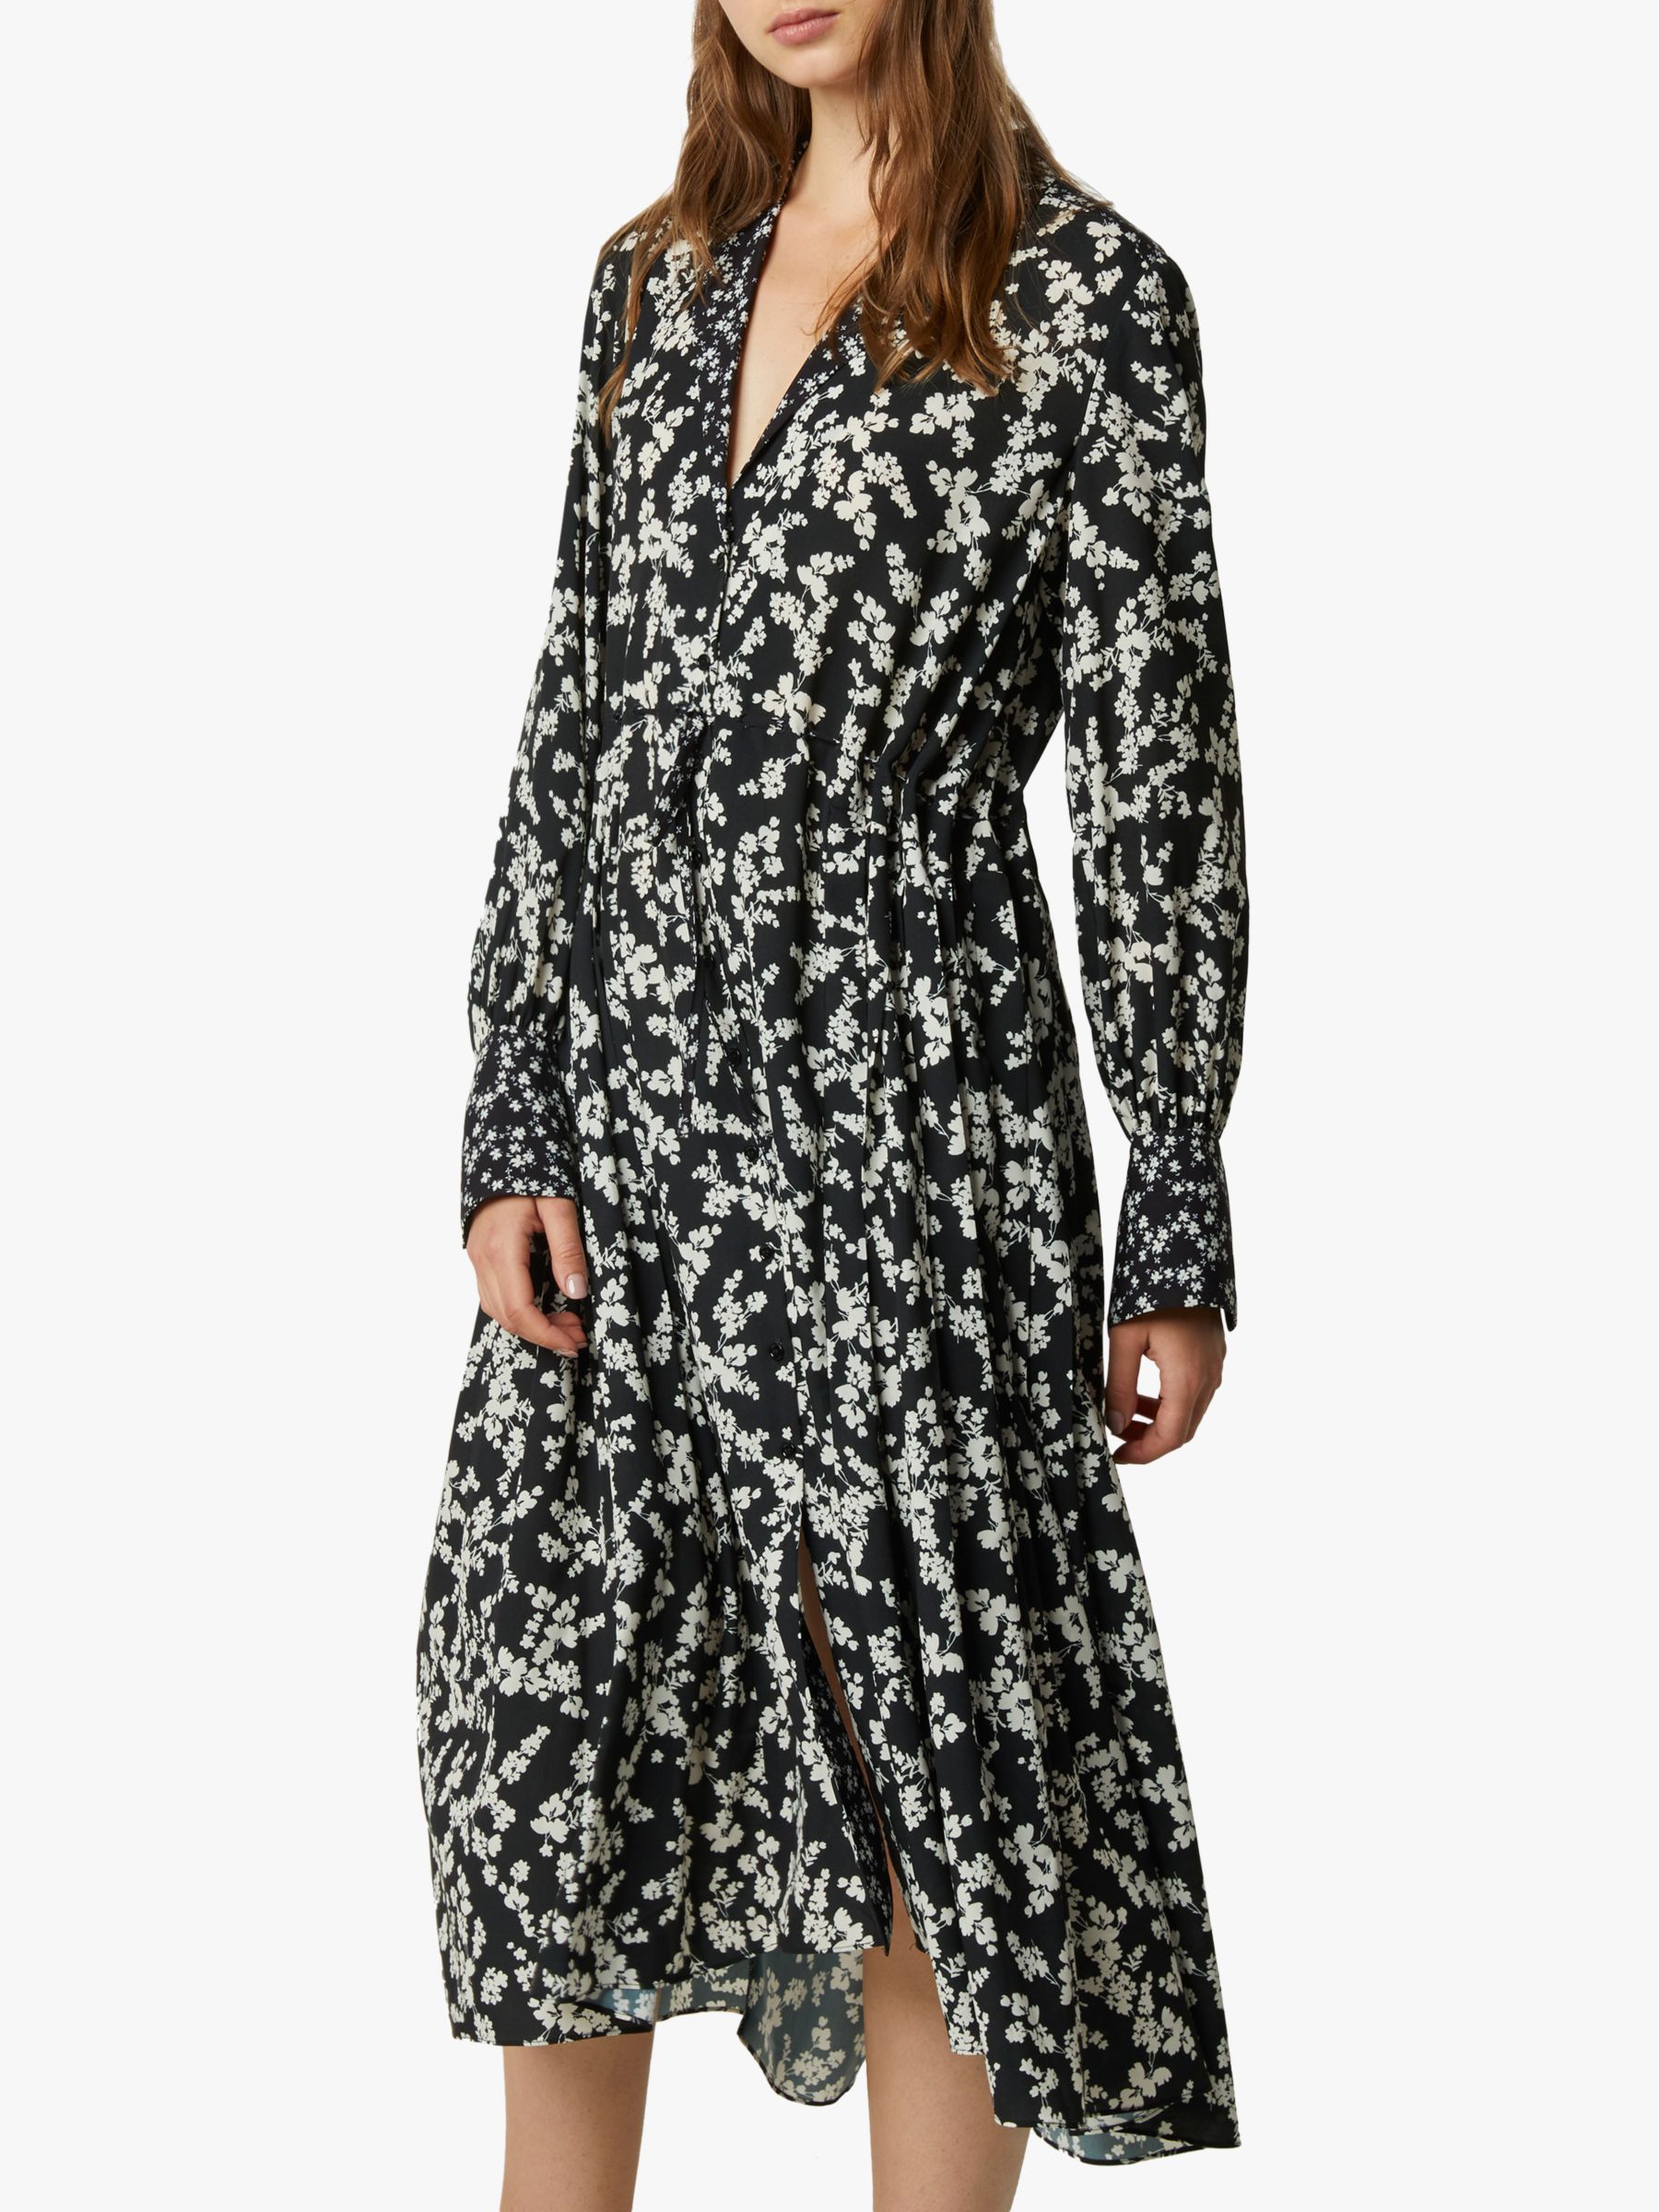 French Connection Bruna Floral Shirt Dress, Black/Classic Cream